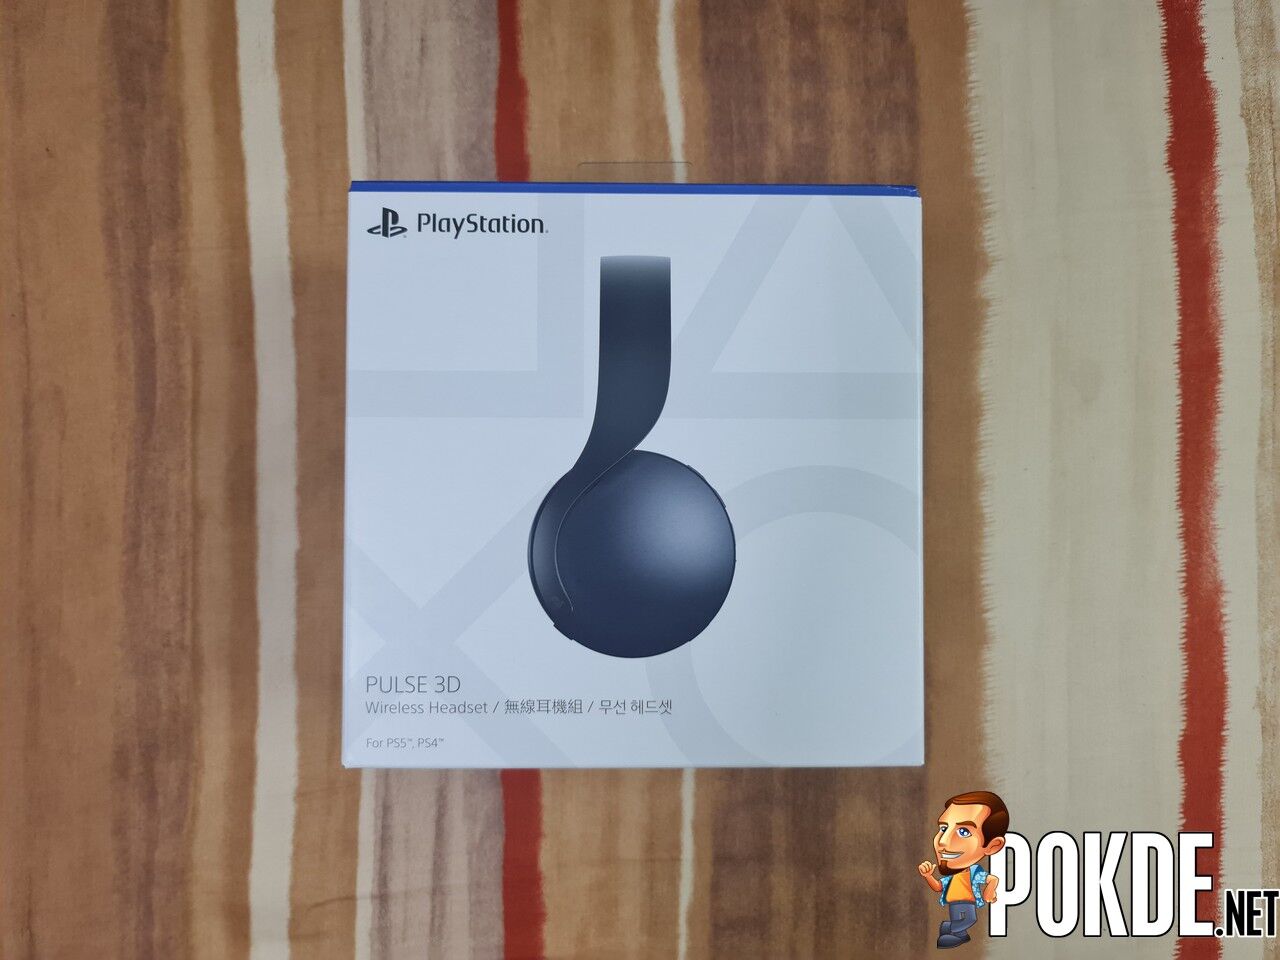 Sony Pulse 3D Wireless Headset Review - Best For PlayStation